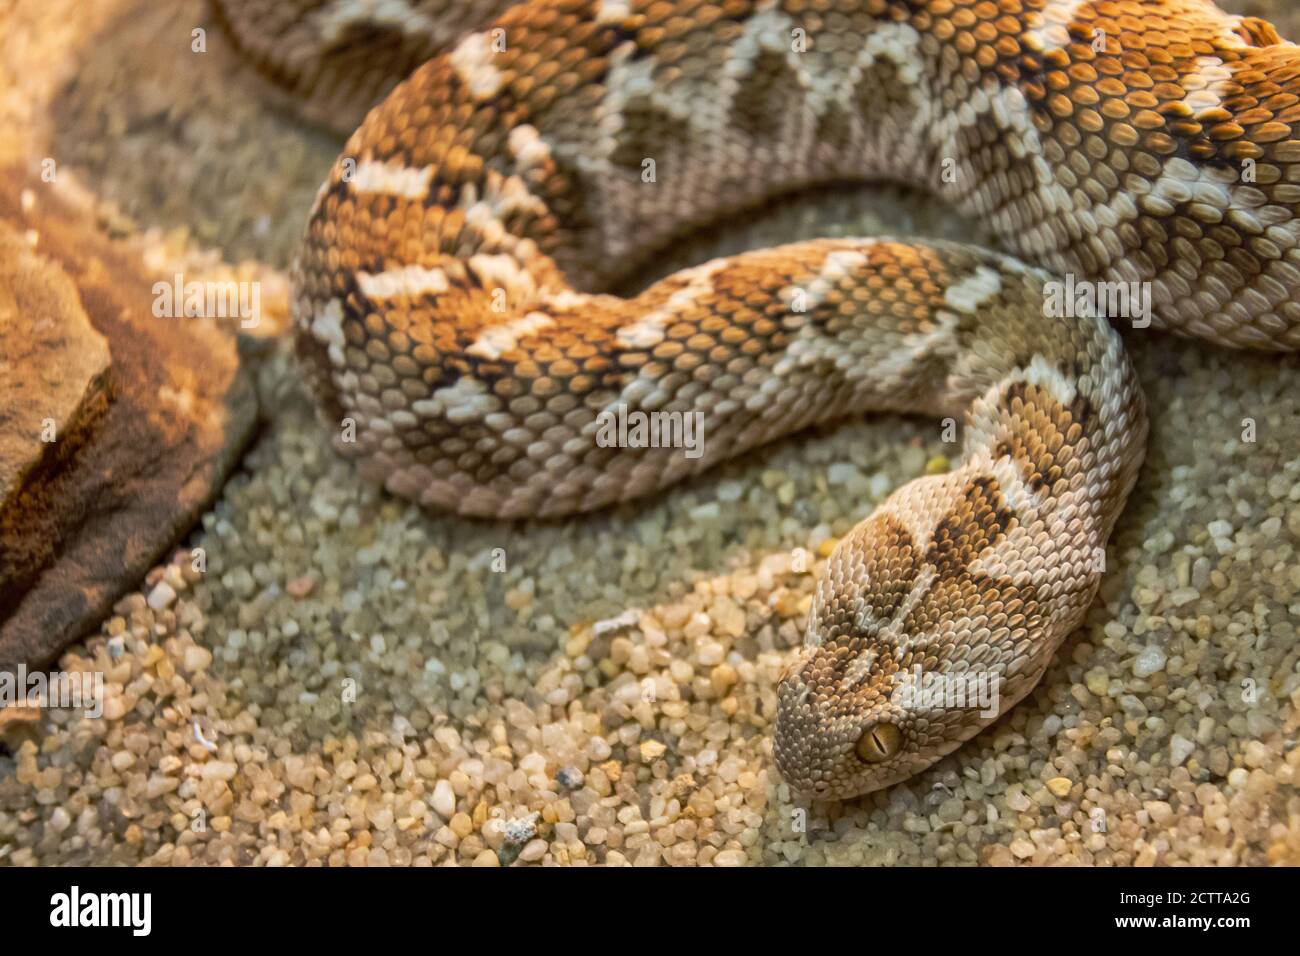 Poisonous snake on the sand of the desert zones Stock Photo